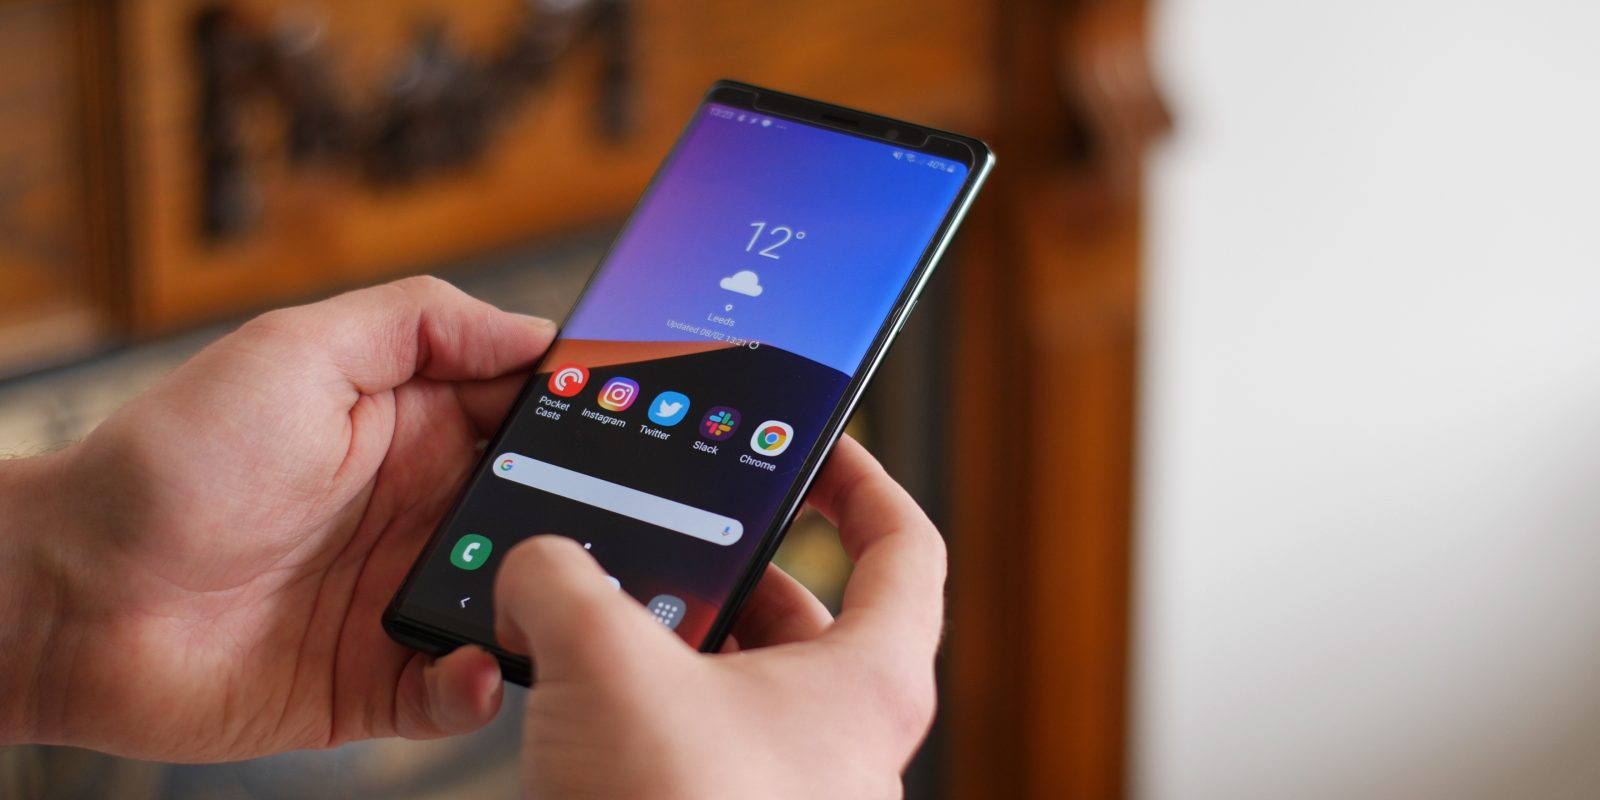 Samsung Galaxy Android Pie Update: When Will My Galaxy Get Android 9.0?